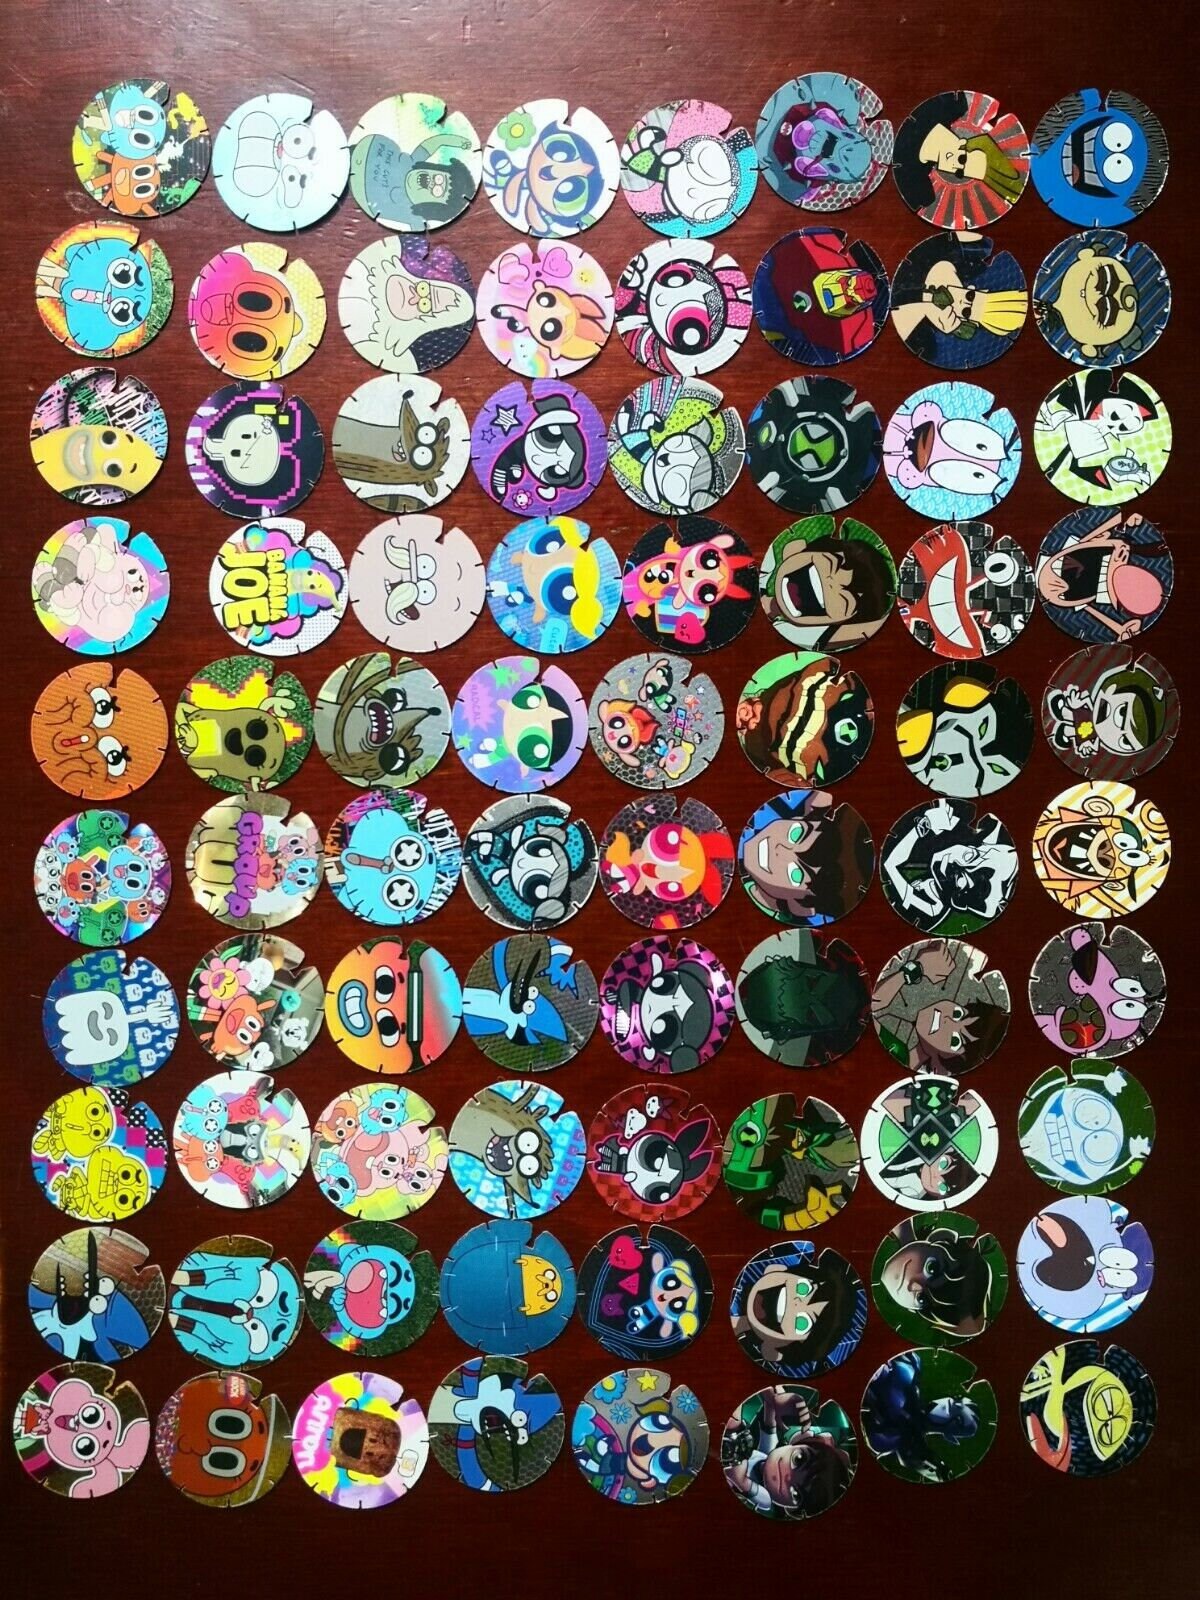 LOONEY TUNES Complete 60 Tazos Pogs GREAT CONDITION HARD TO FIND Toys Collection 